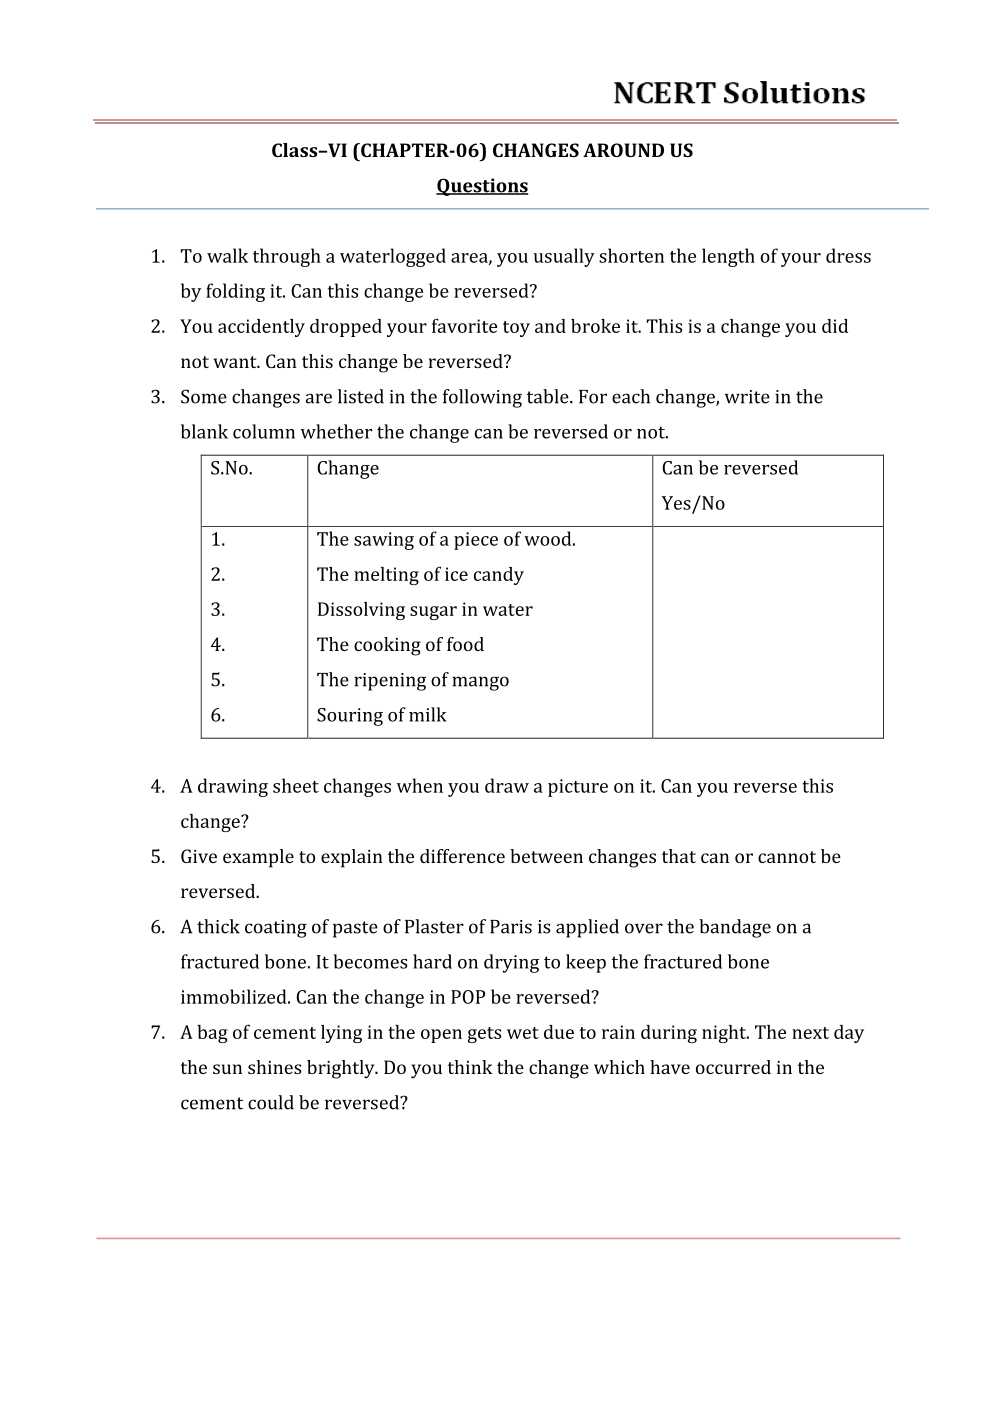 NCERT Solutions For Class 6 Science Chapter 6